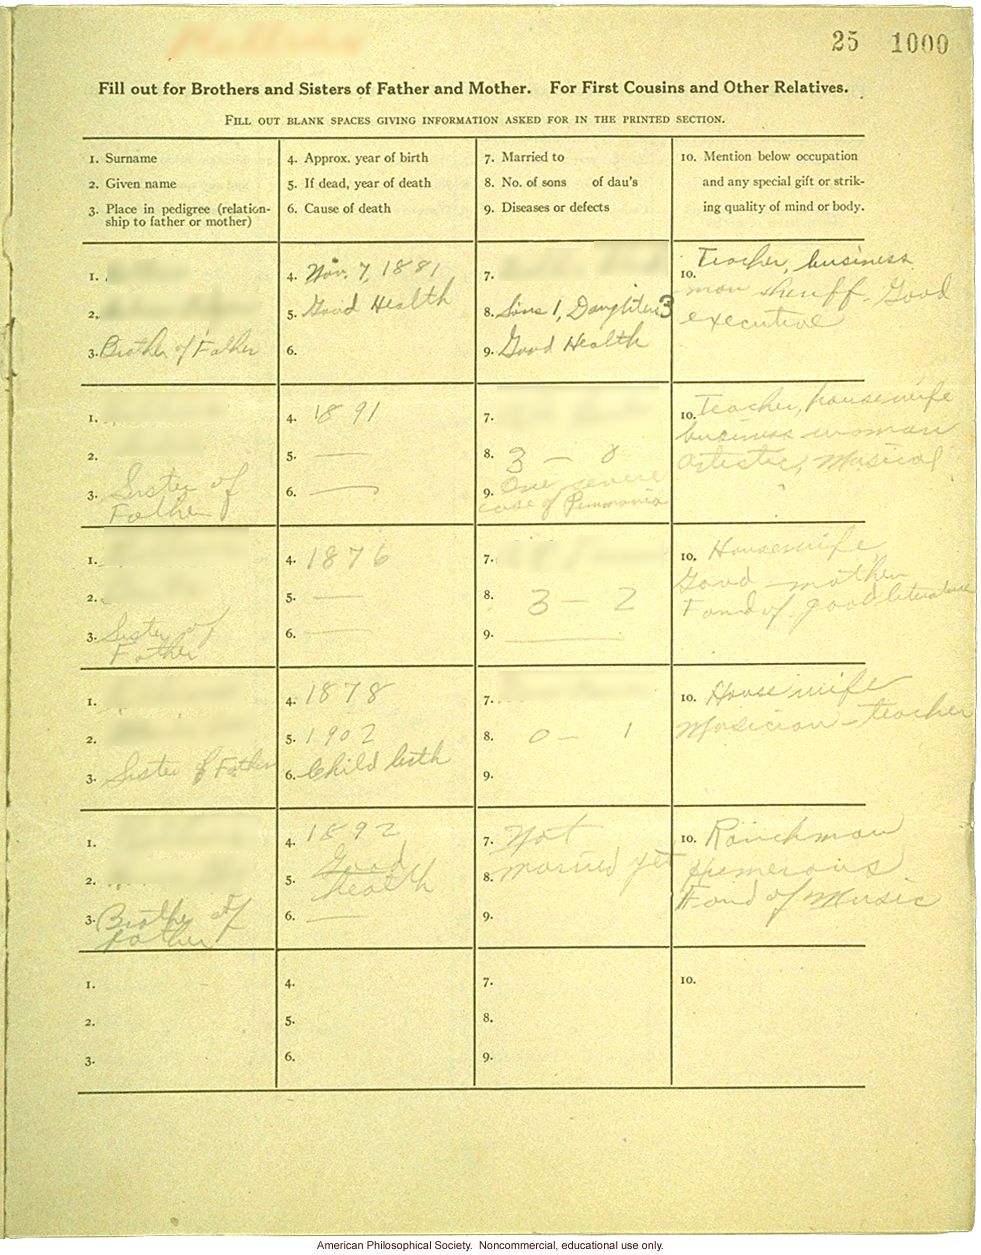 &quote;Large family&quote; winner, Fitter Families Contest, Texas State Fair (1925): Abridged record of family traits